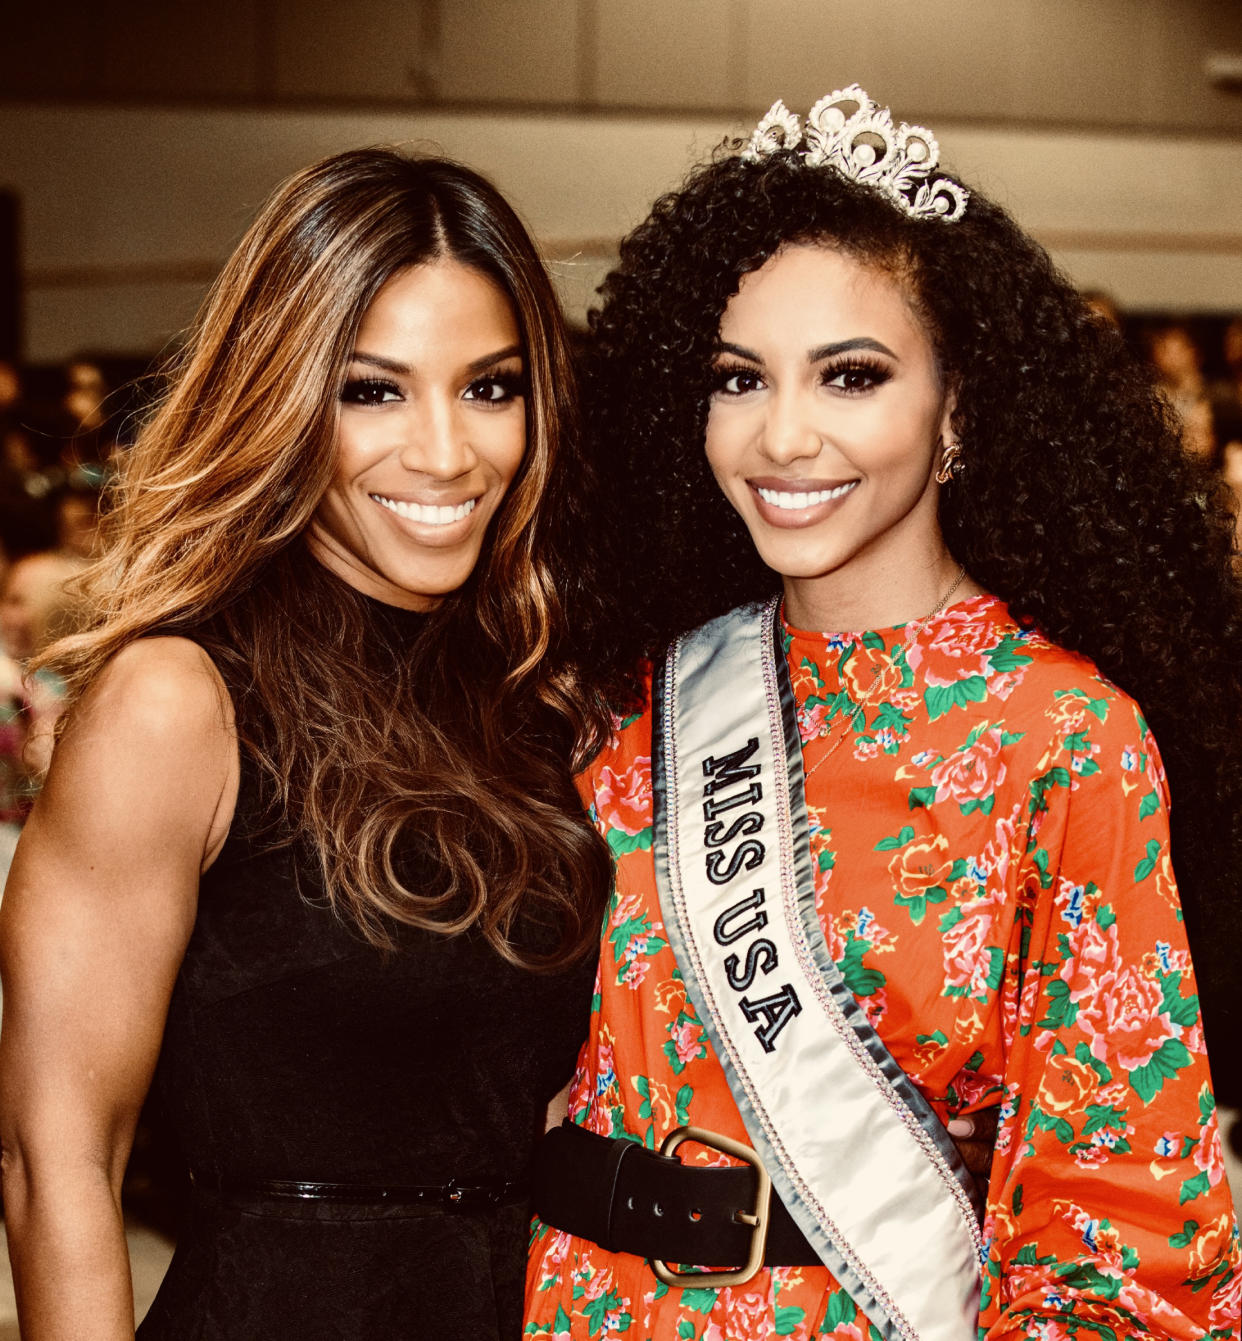 April Simpkins, left, and her daughter, Cheslie Kryst, wearing the 2019 Miss USA sash and tiara.